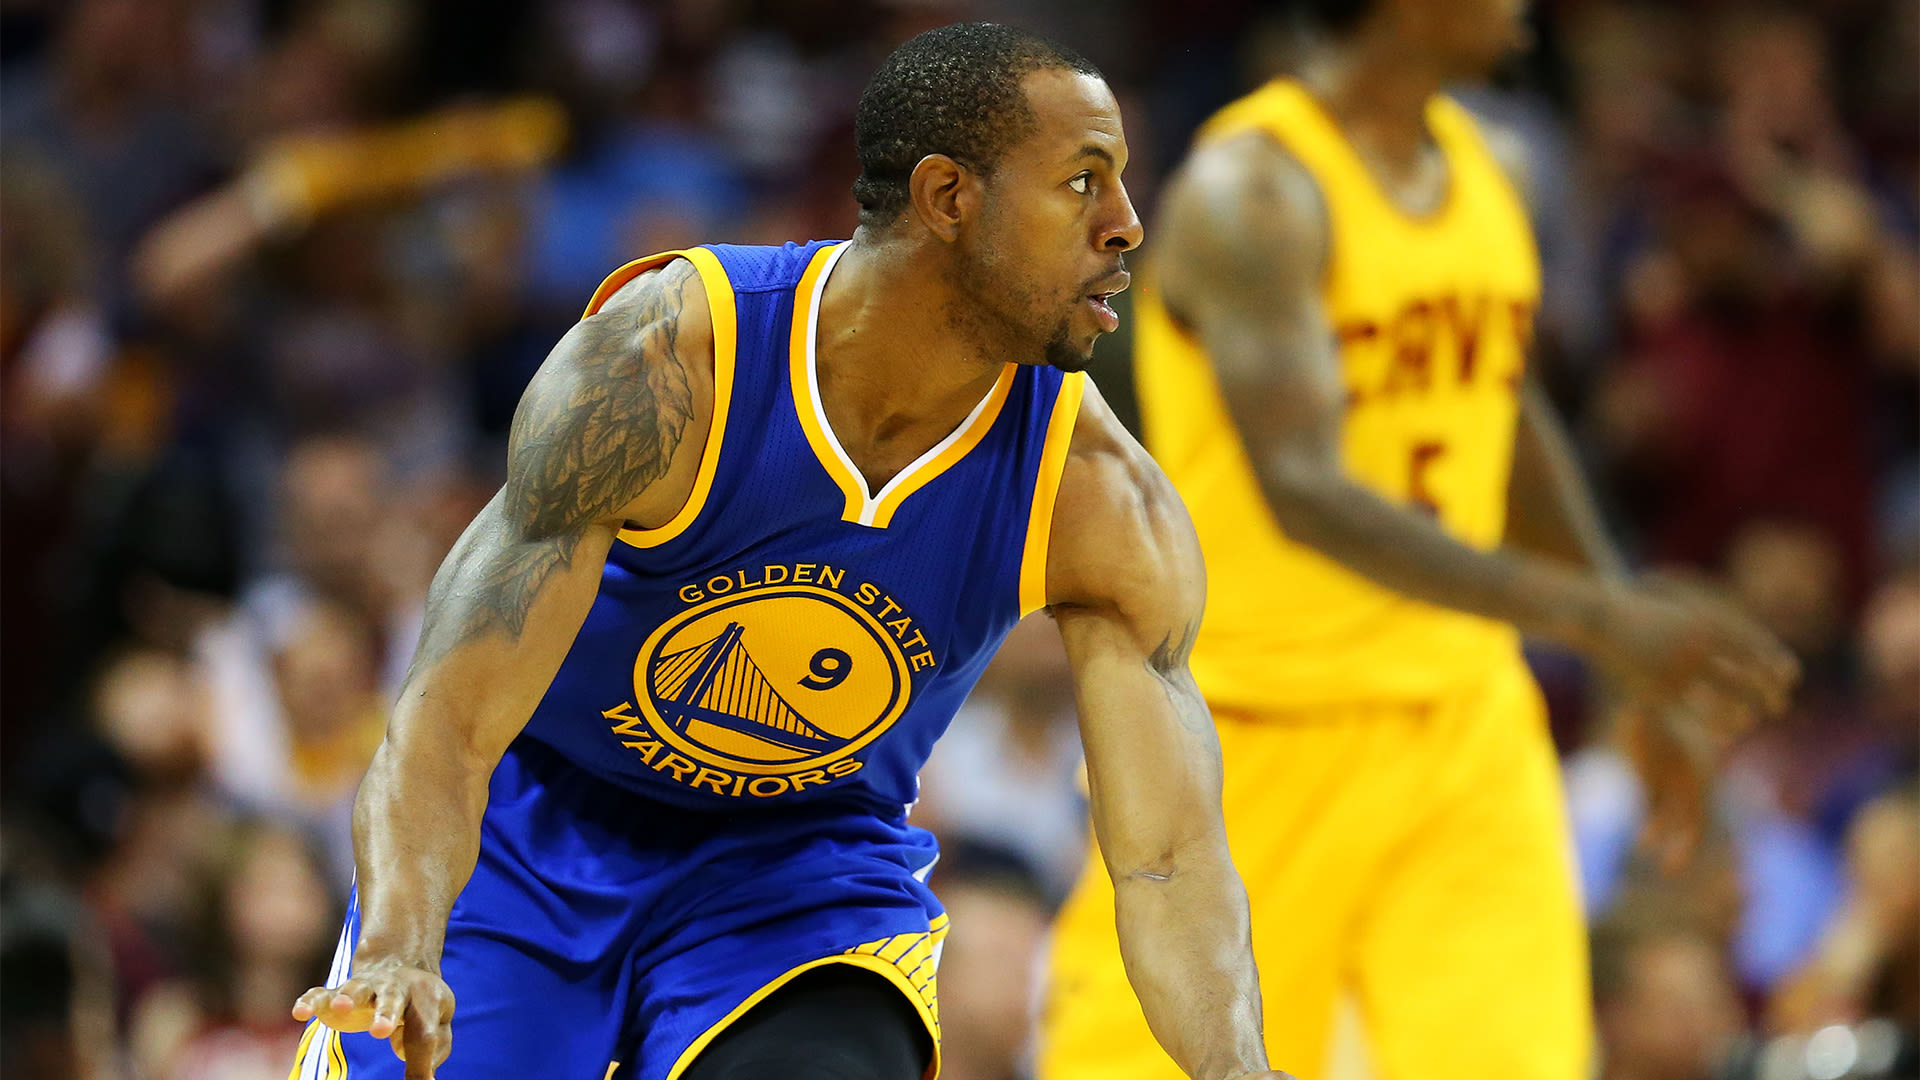 Being locked in it affects you: Andre Iguodala outlines major downside of ' Heat culture', cites missing wide open shots